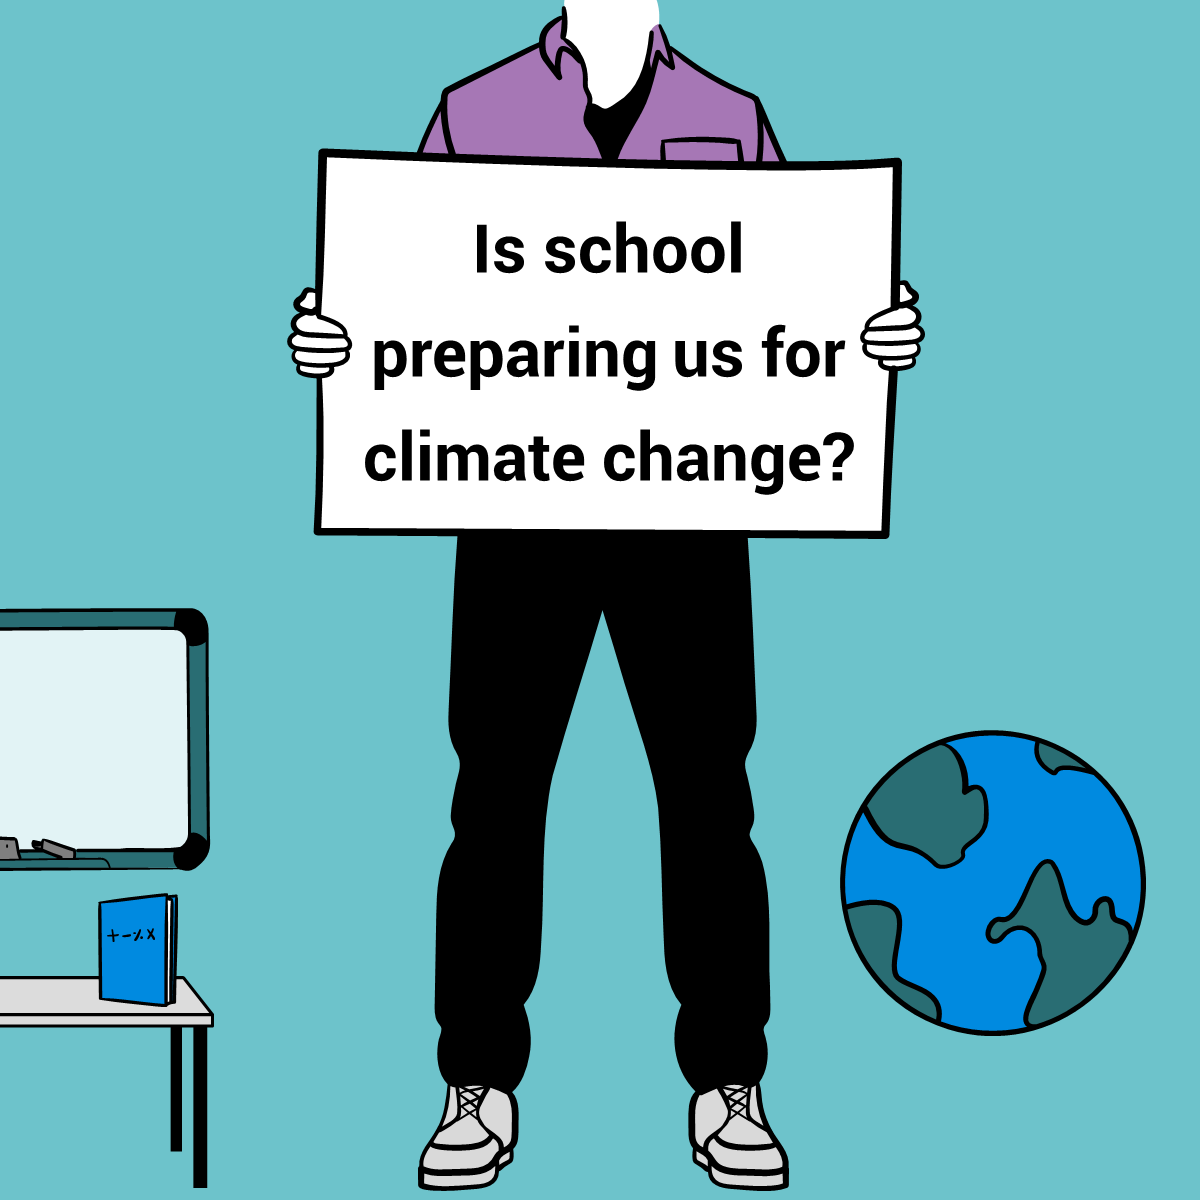 Student asking: "Is school preparing us for climate change?"